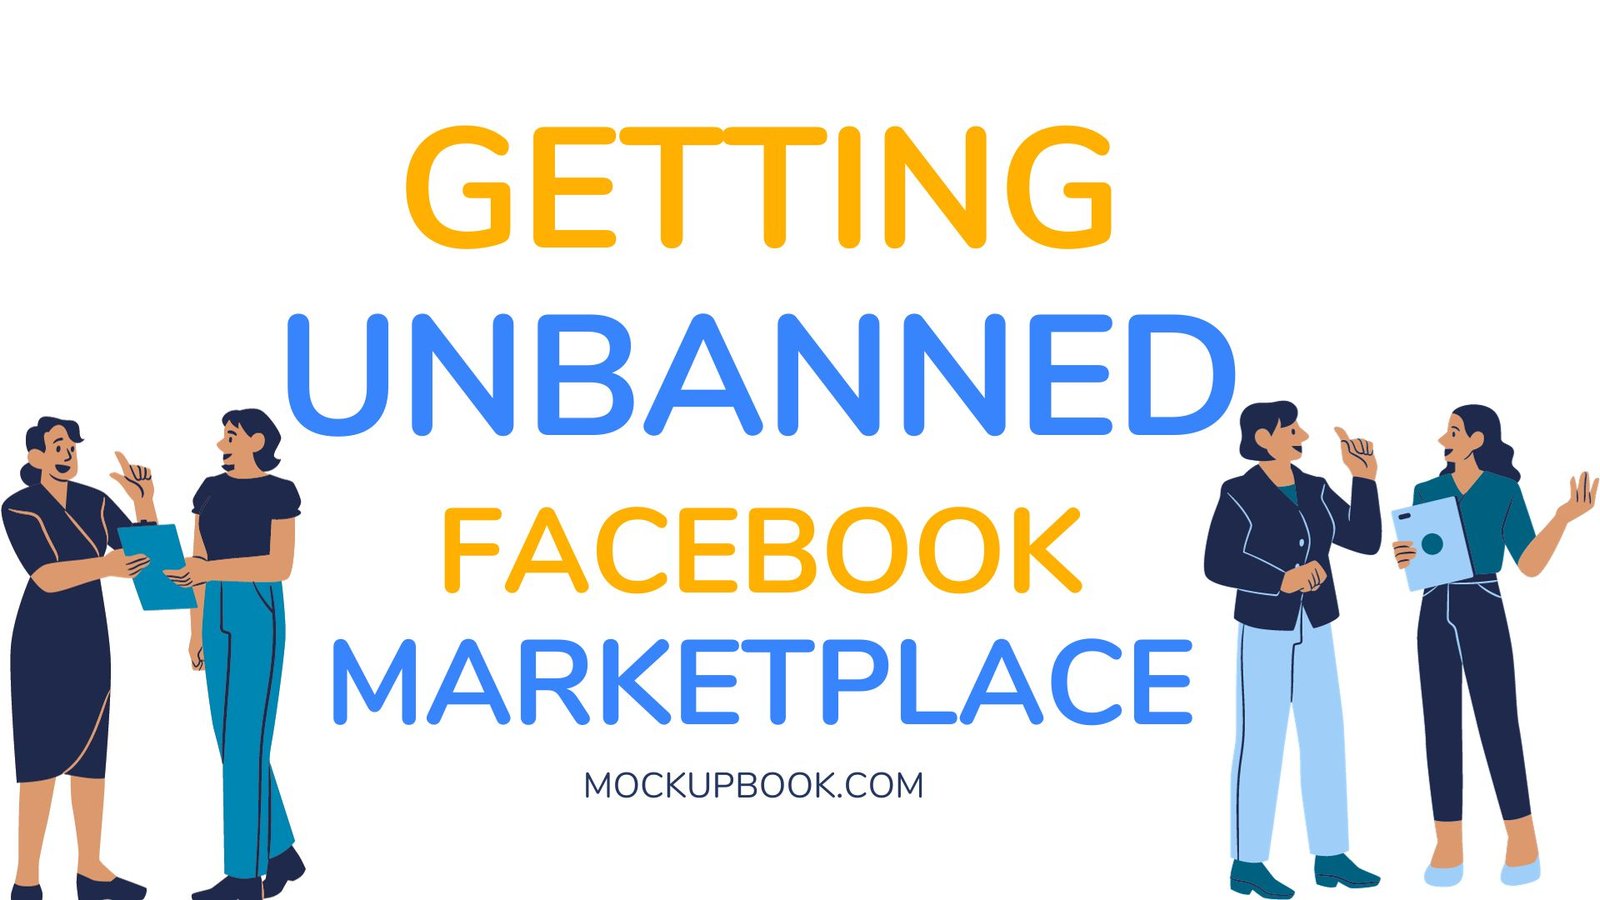 UNBANNED FROM FACEBOOK